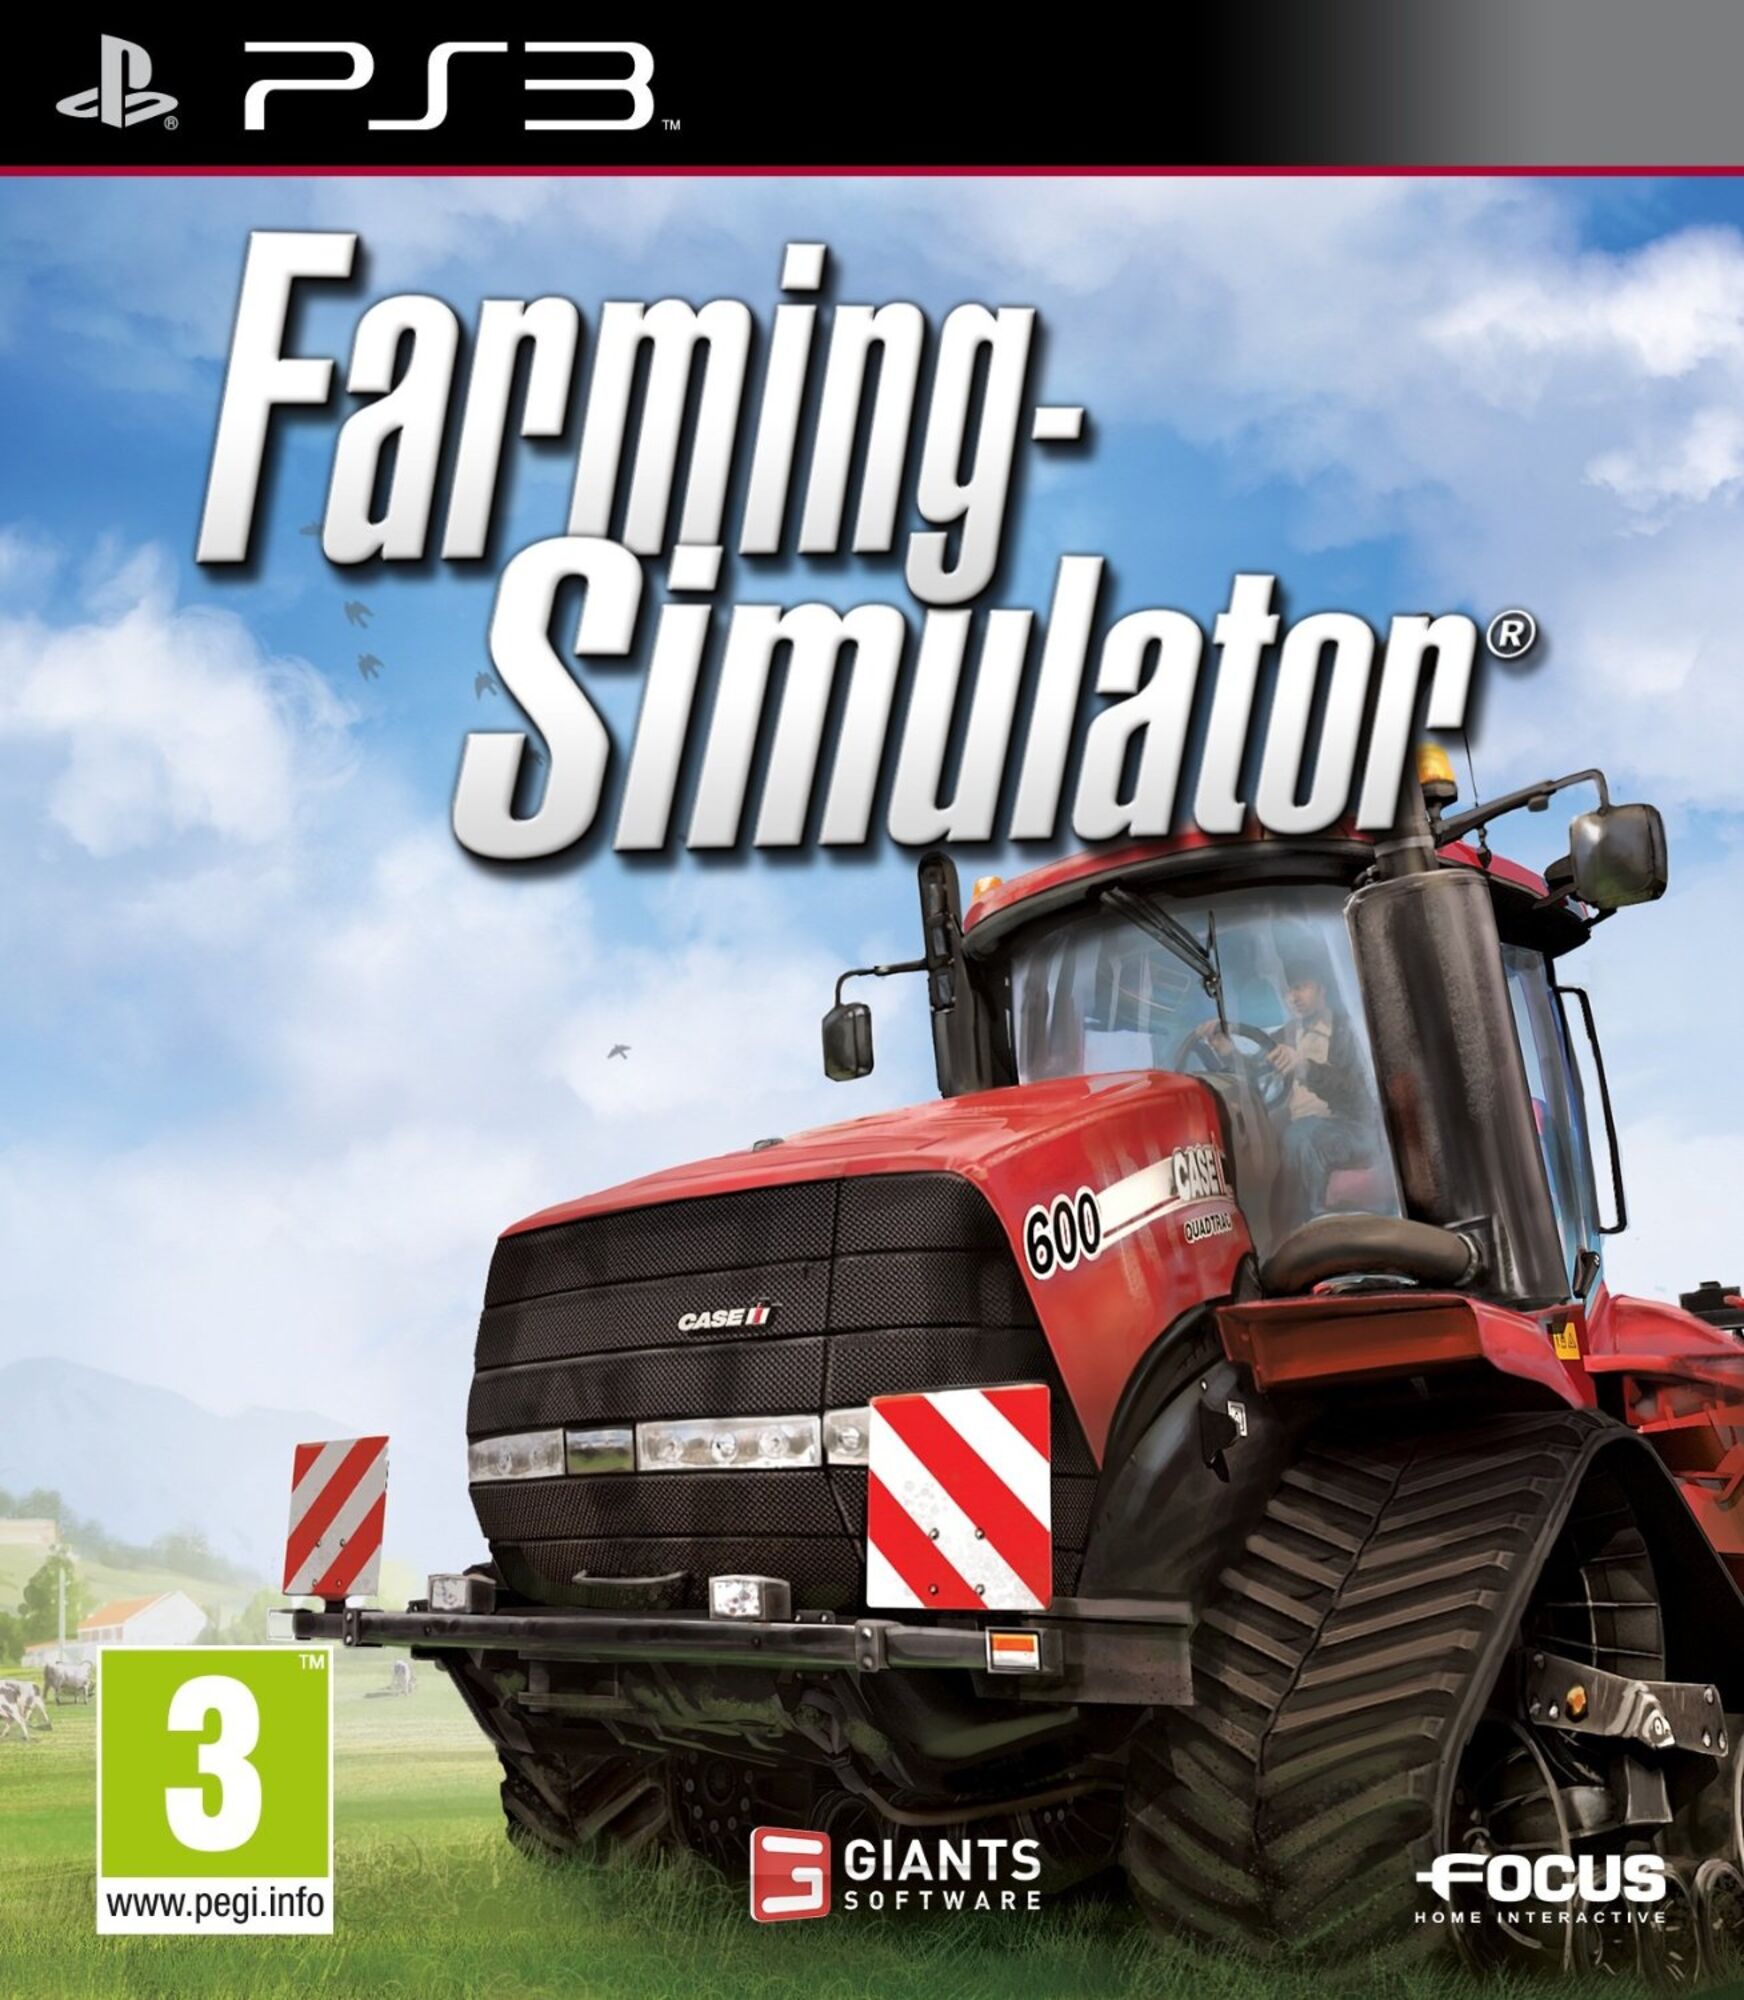 which playstation does farming simulator 14 play on